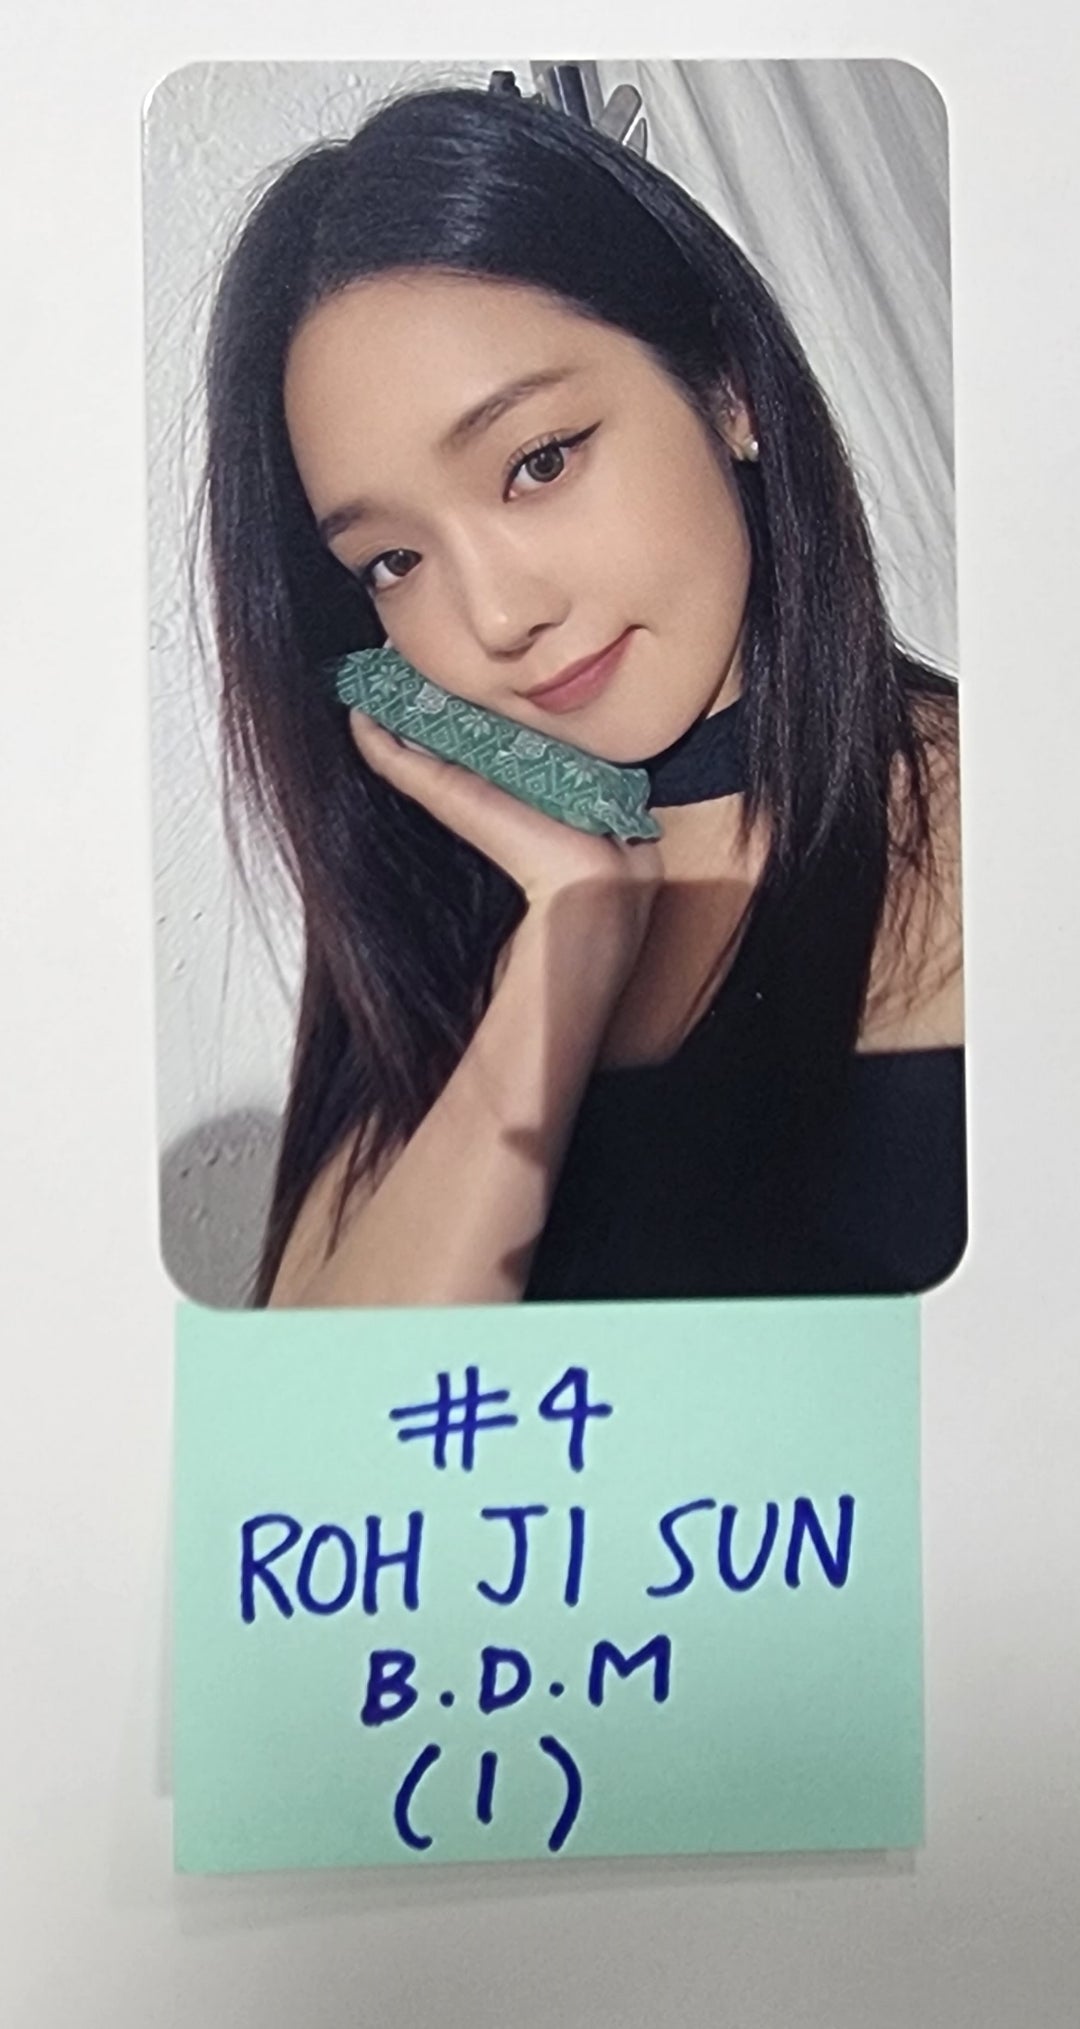 Fromis_9 "Unlock My World" - Blue Dream Media Fansign Event Photocard